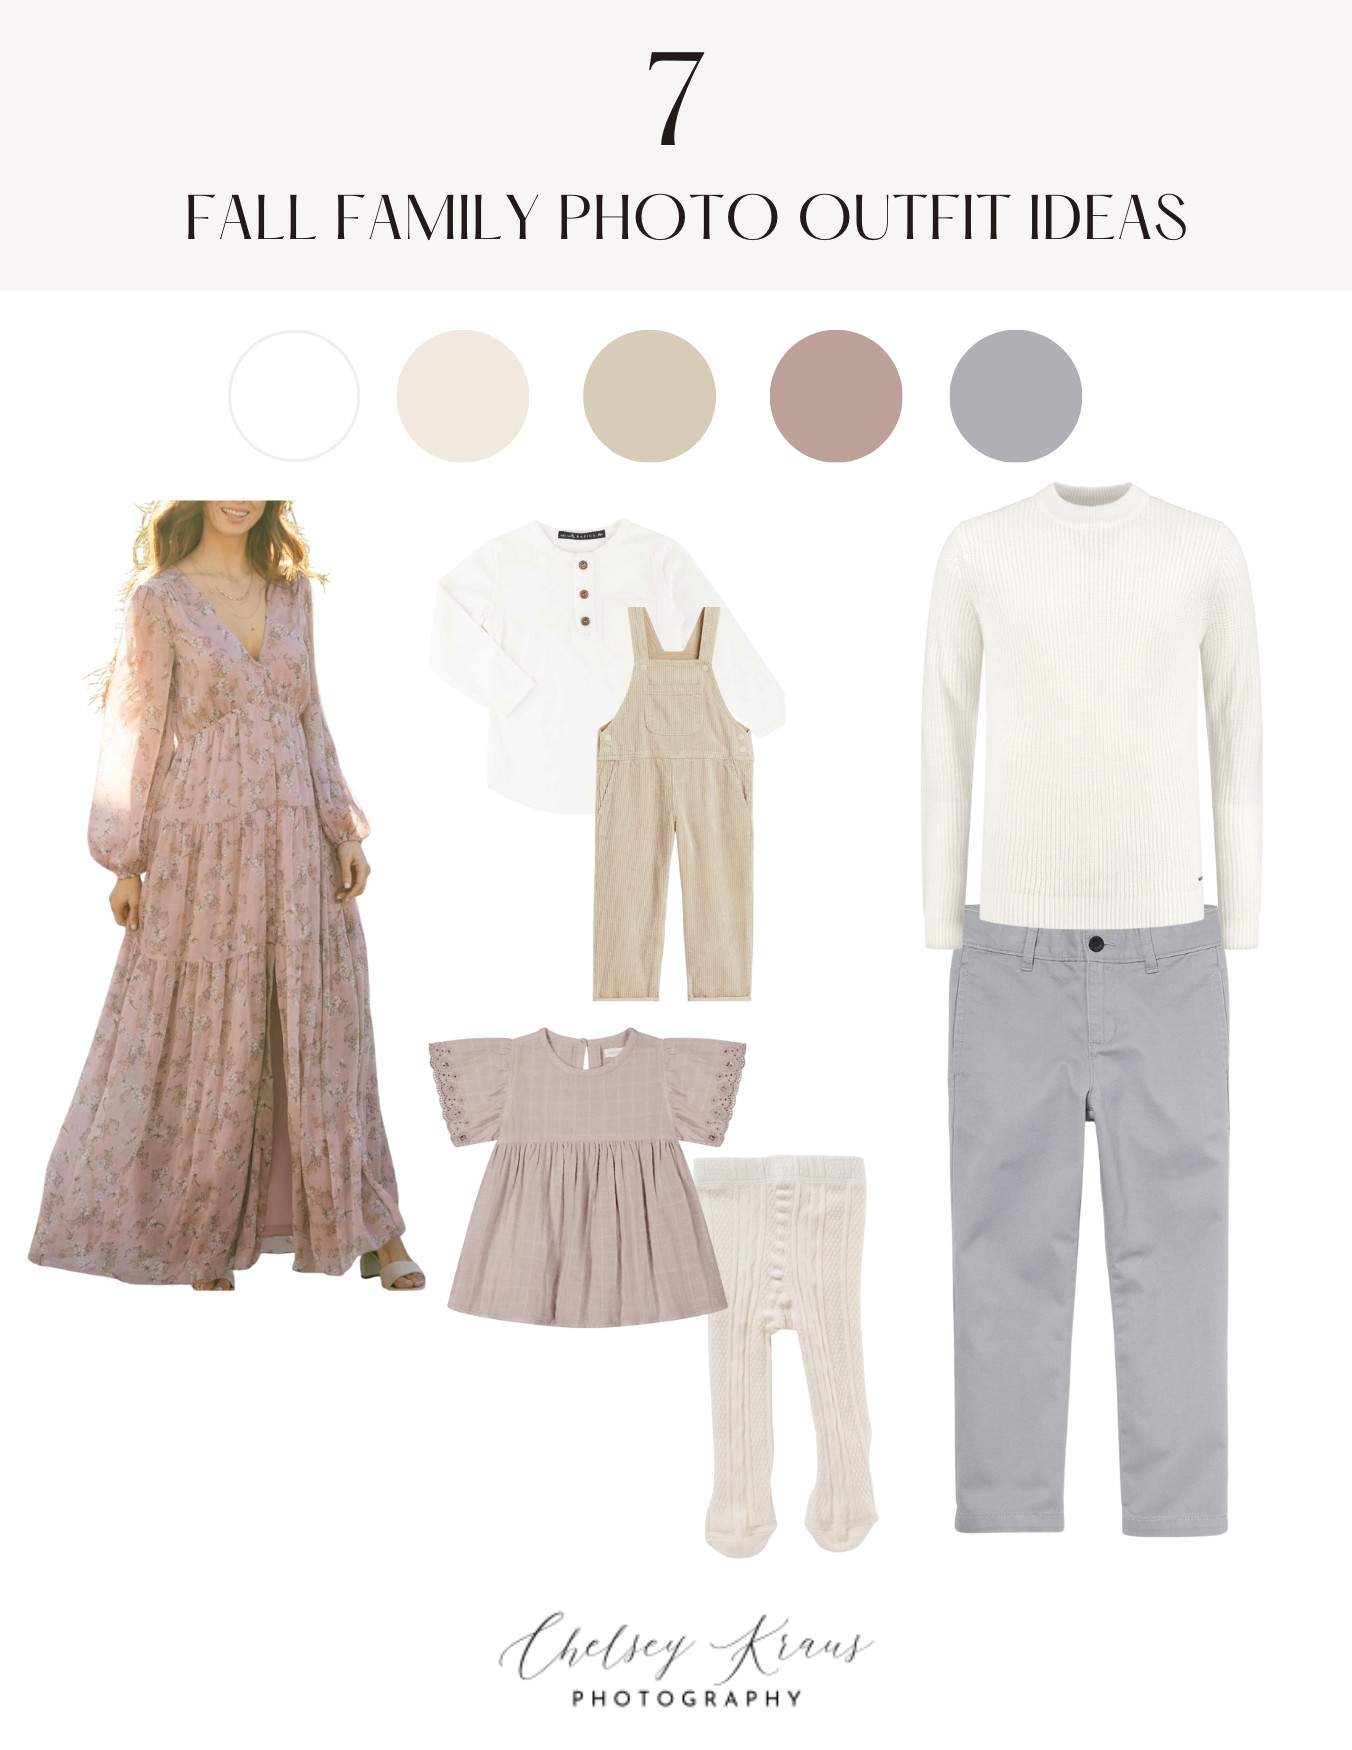 style board for fall family photo outfits as styled by a professional family photographer in virginia beach, virginia